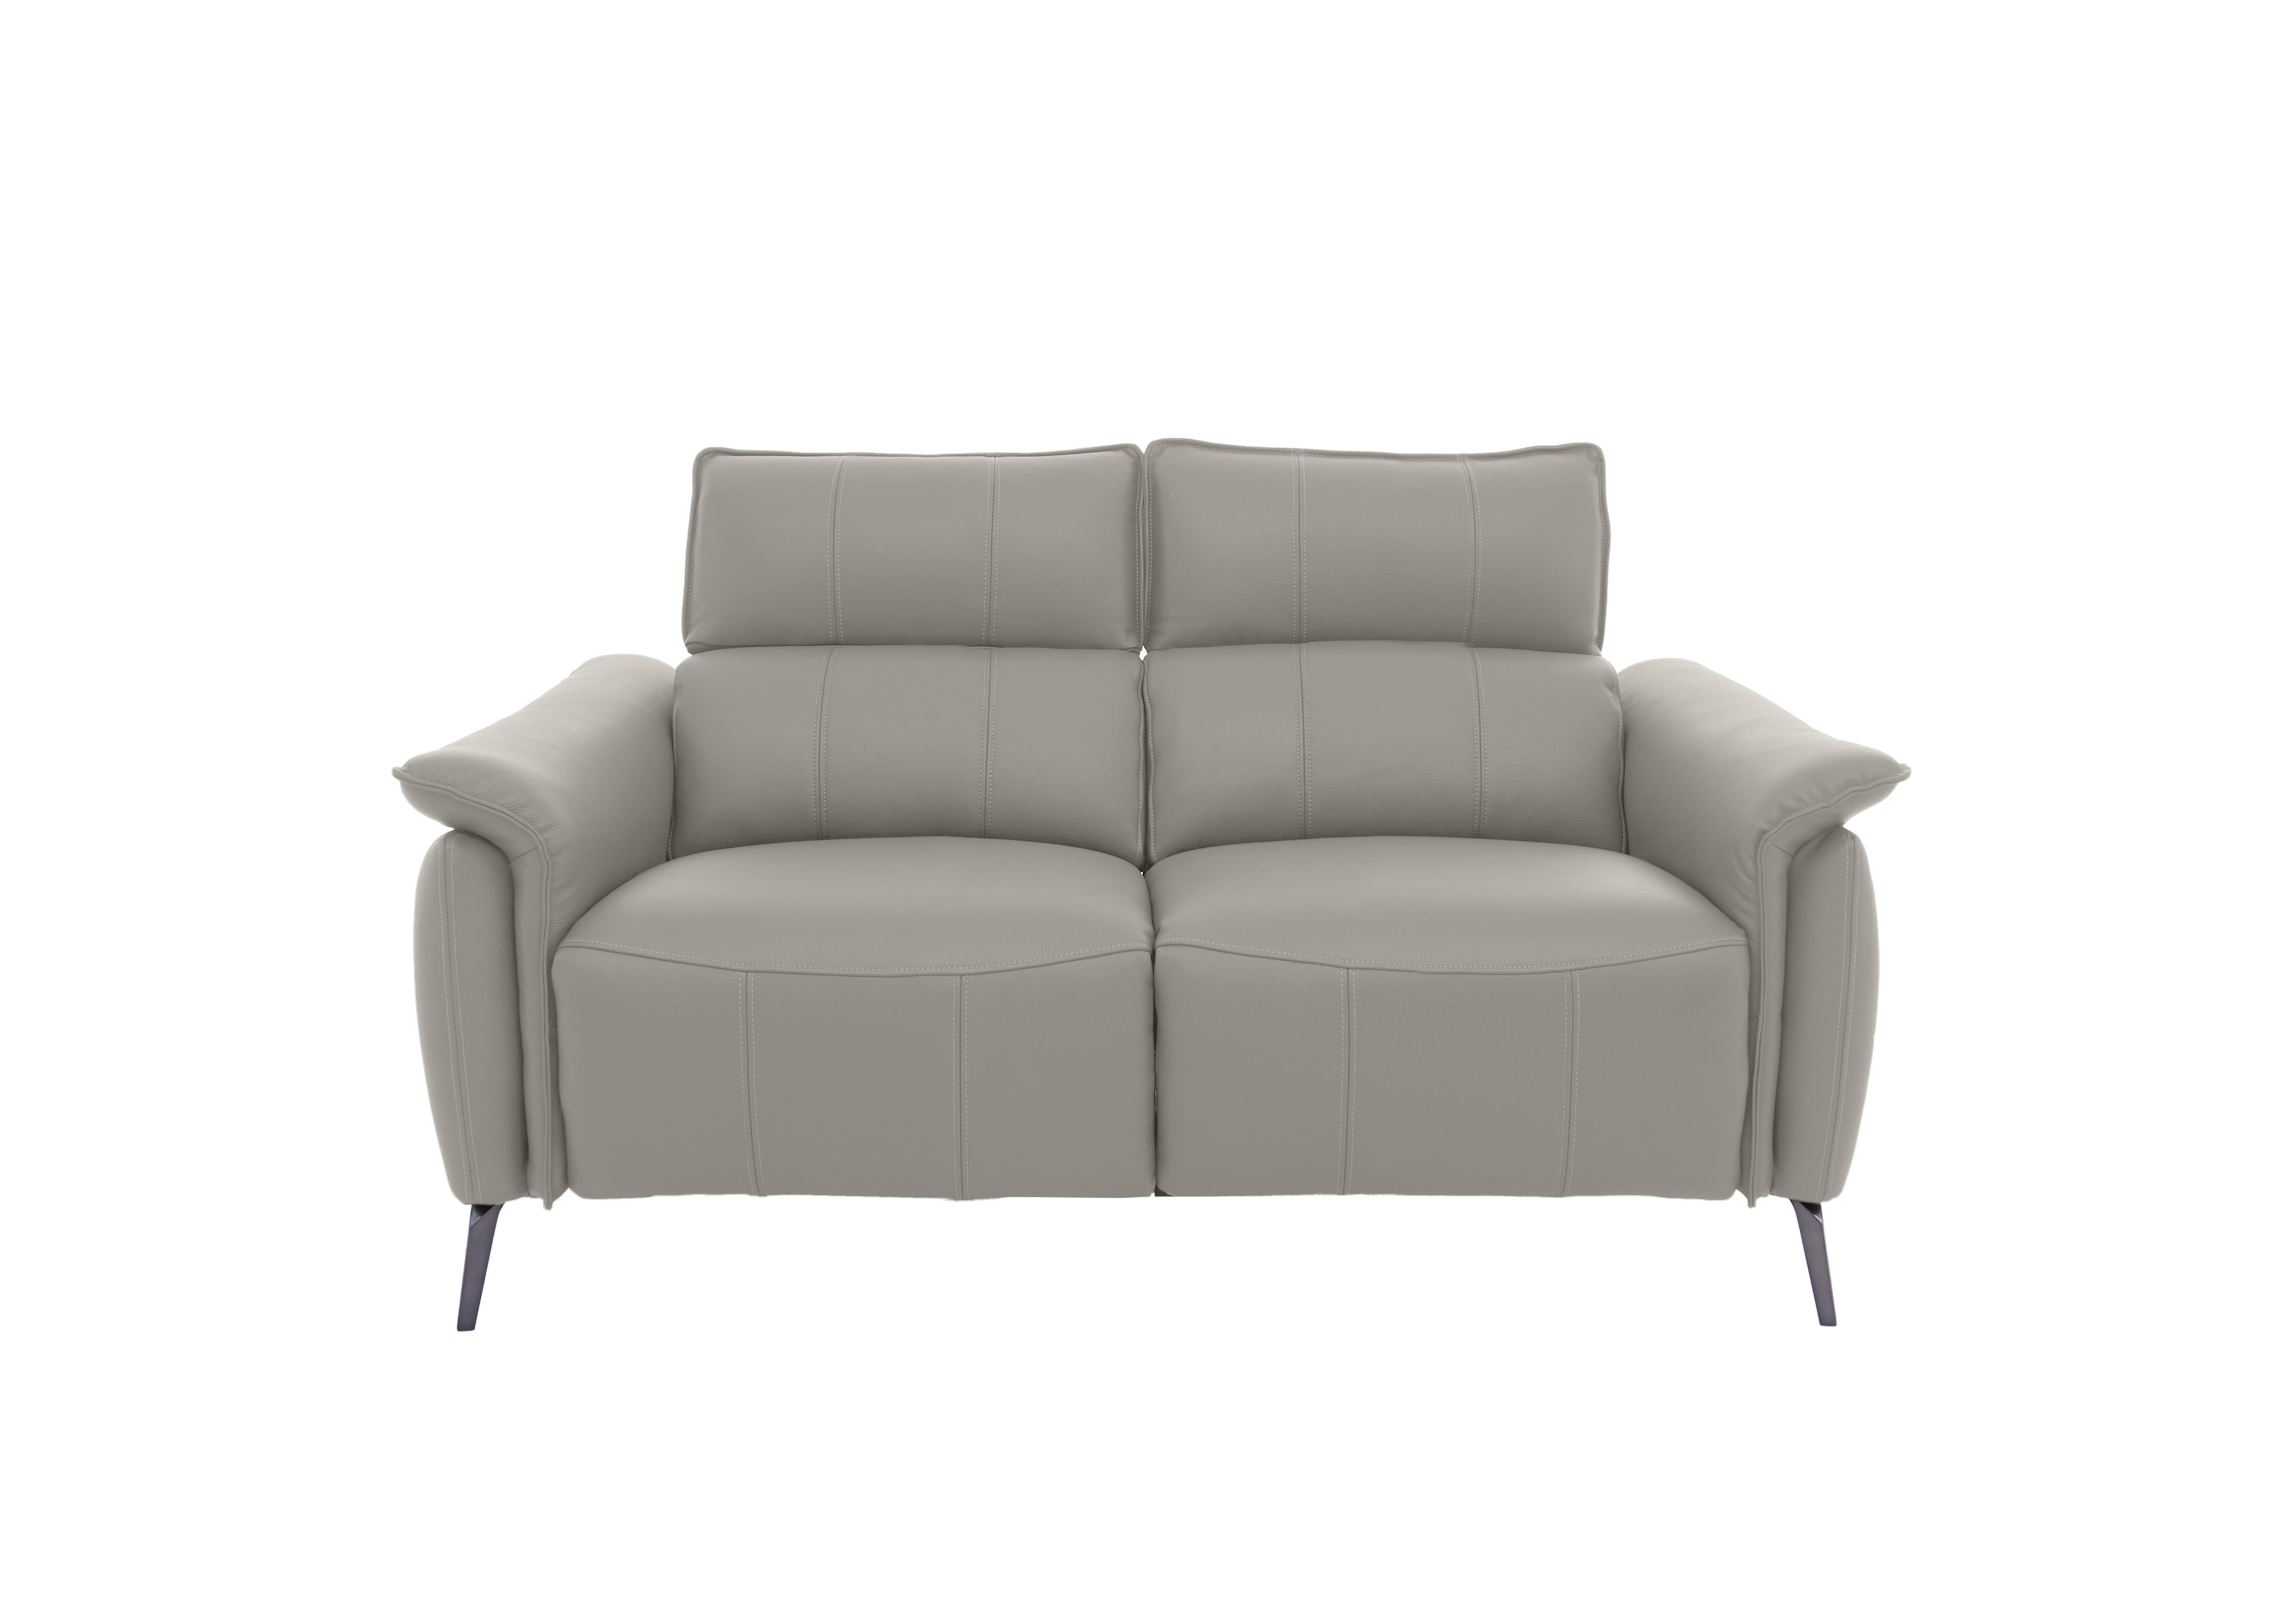 Jude 2 Seater Leather Sofa in Montana New Grey Cat-60/28 on Furniture Village